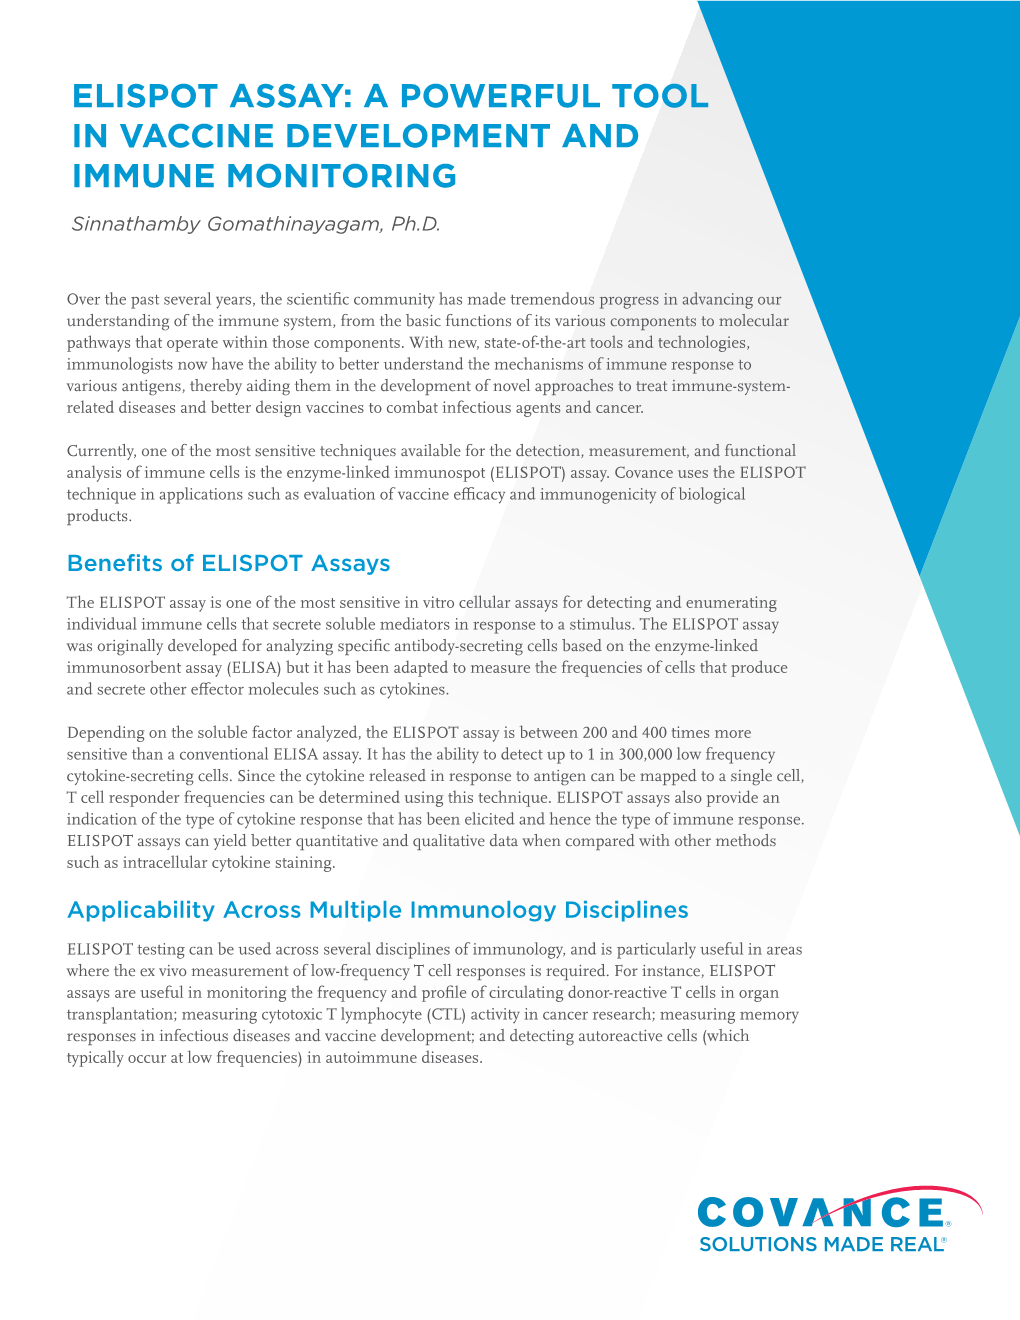 Elispot Assay: a Powerful Tool in Vaccine Development and Immune Monitoring